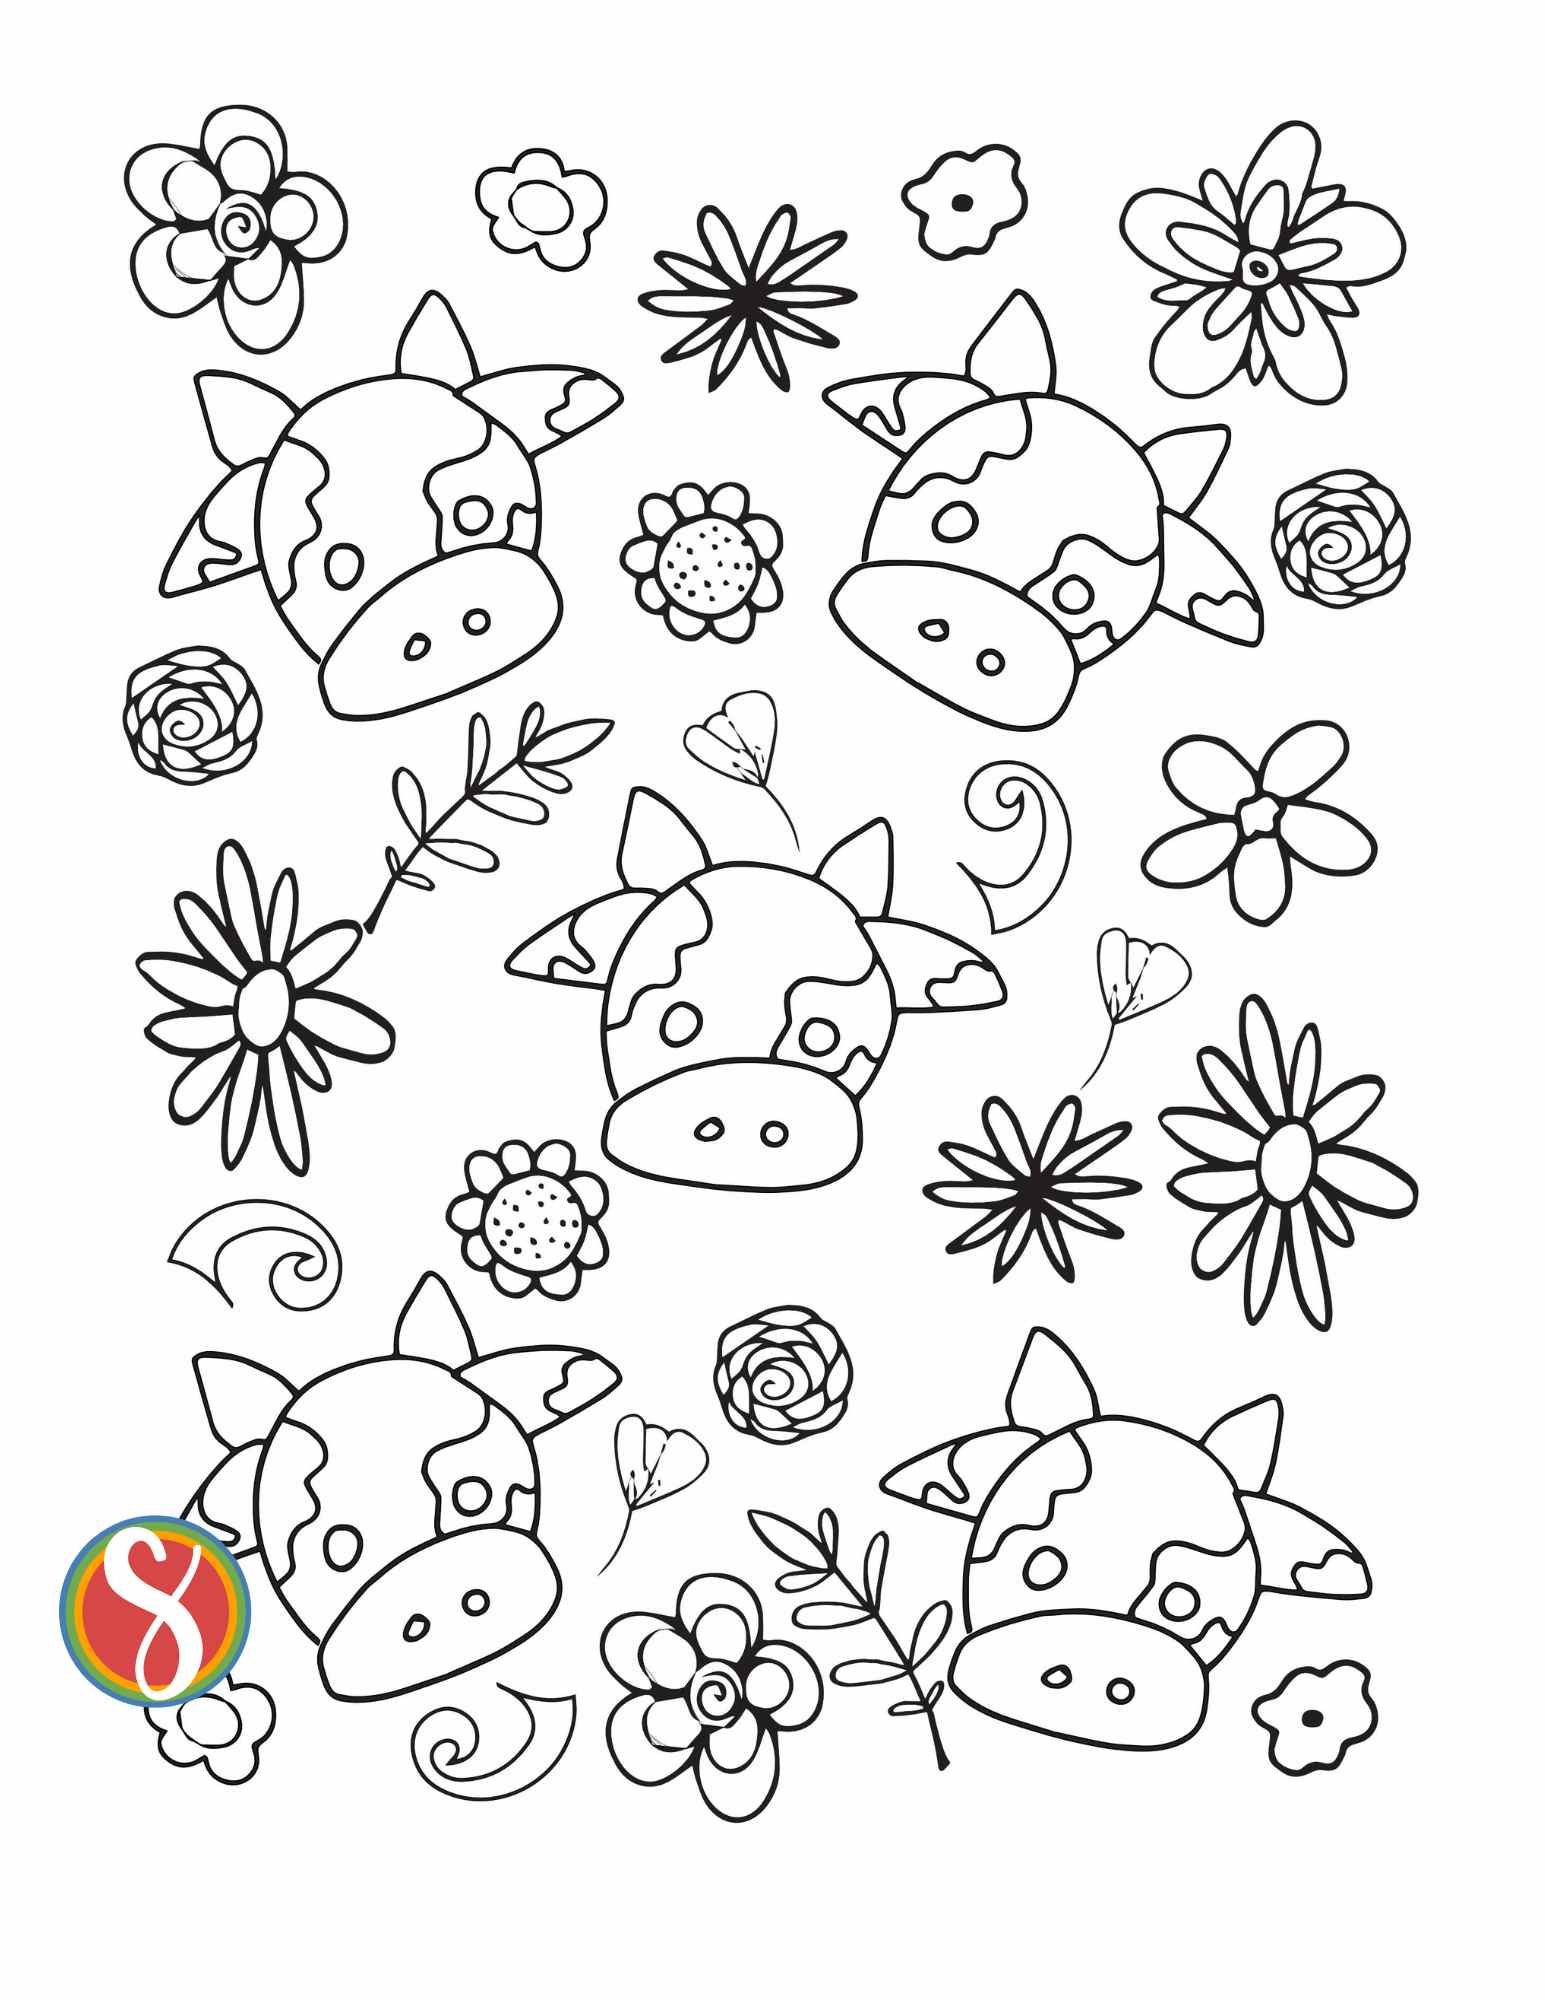 5 cute cow heads, black and white and colorable, surrounded by simple little black and white colorable flowers